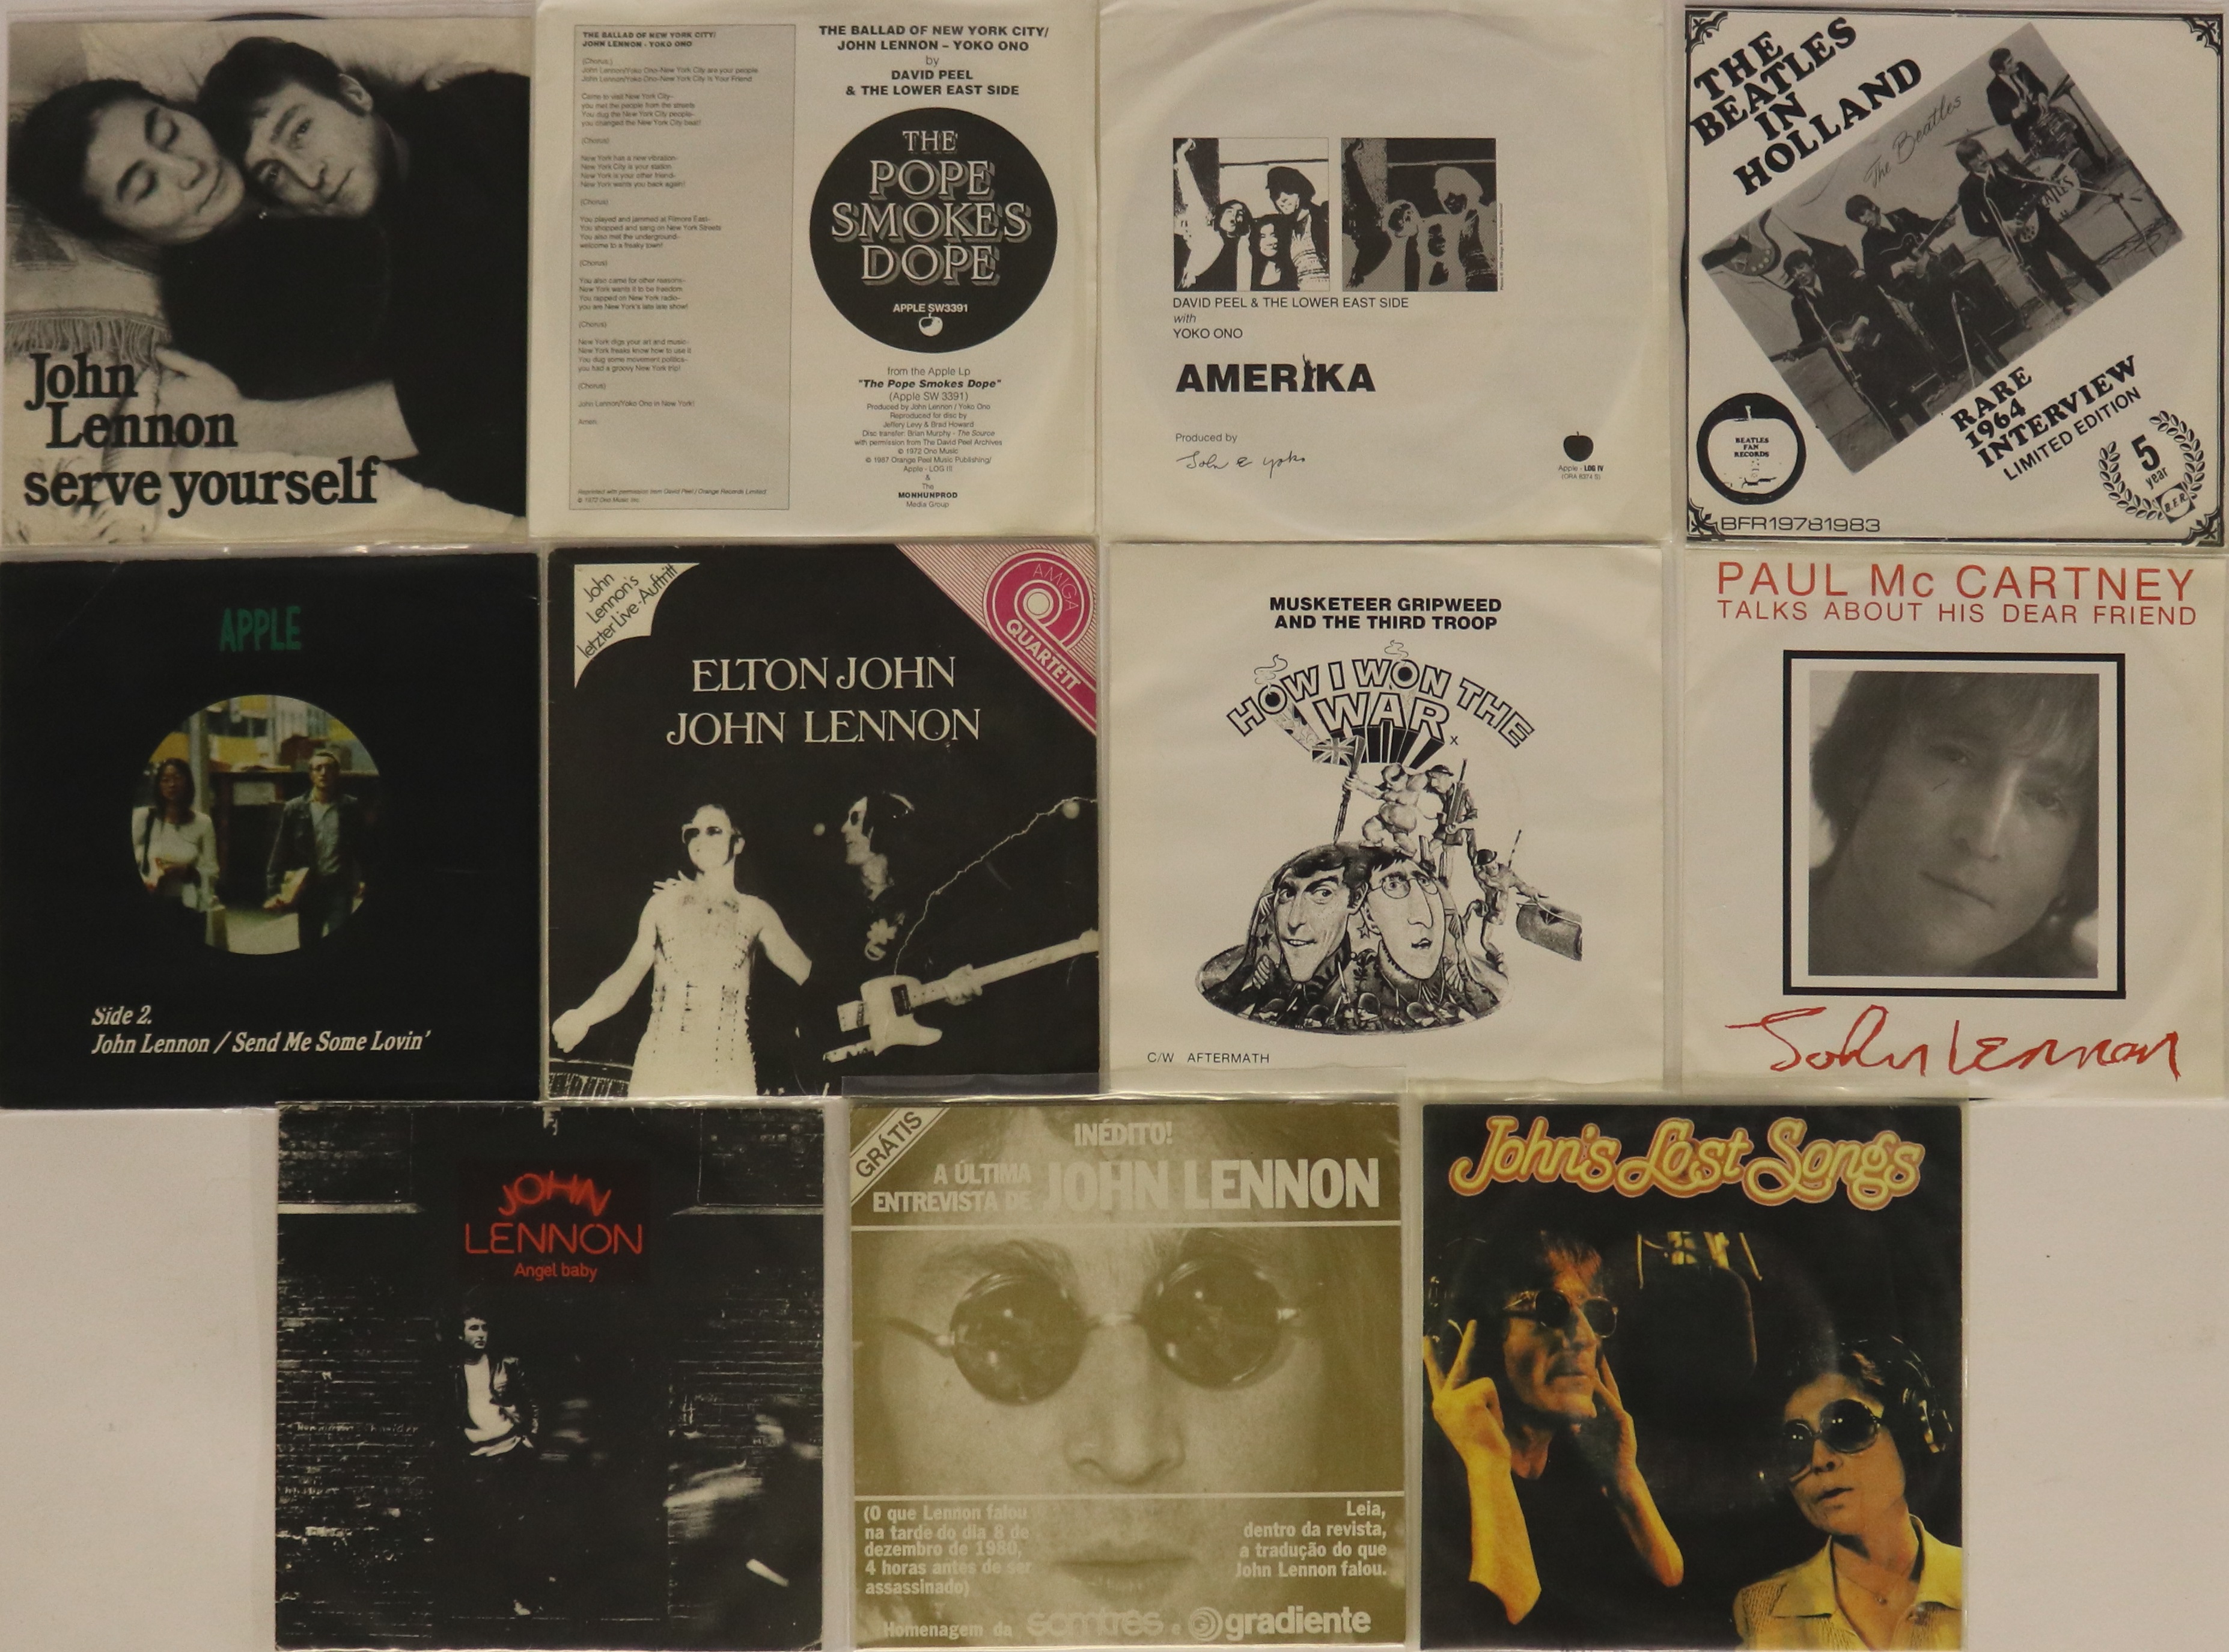 JOHN LENNON/BEATLES - PRIVATE EPs/7" - Another intriguing selection of 11 x EPs/7".